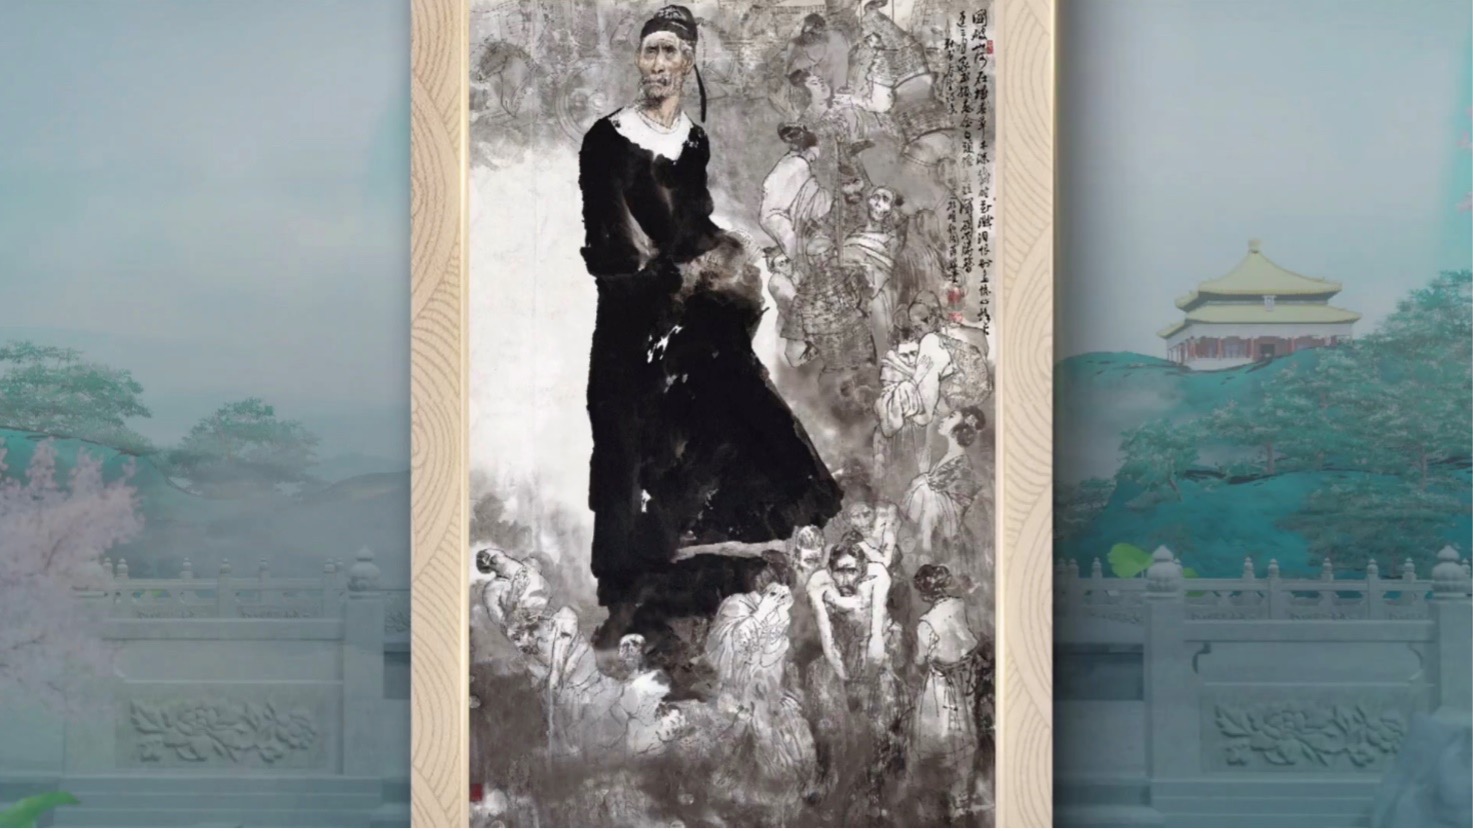 In 1980, Wang created the painting 